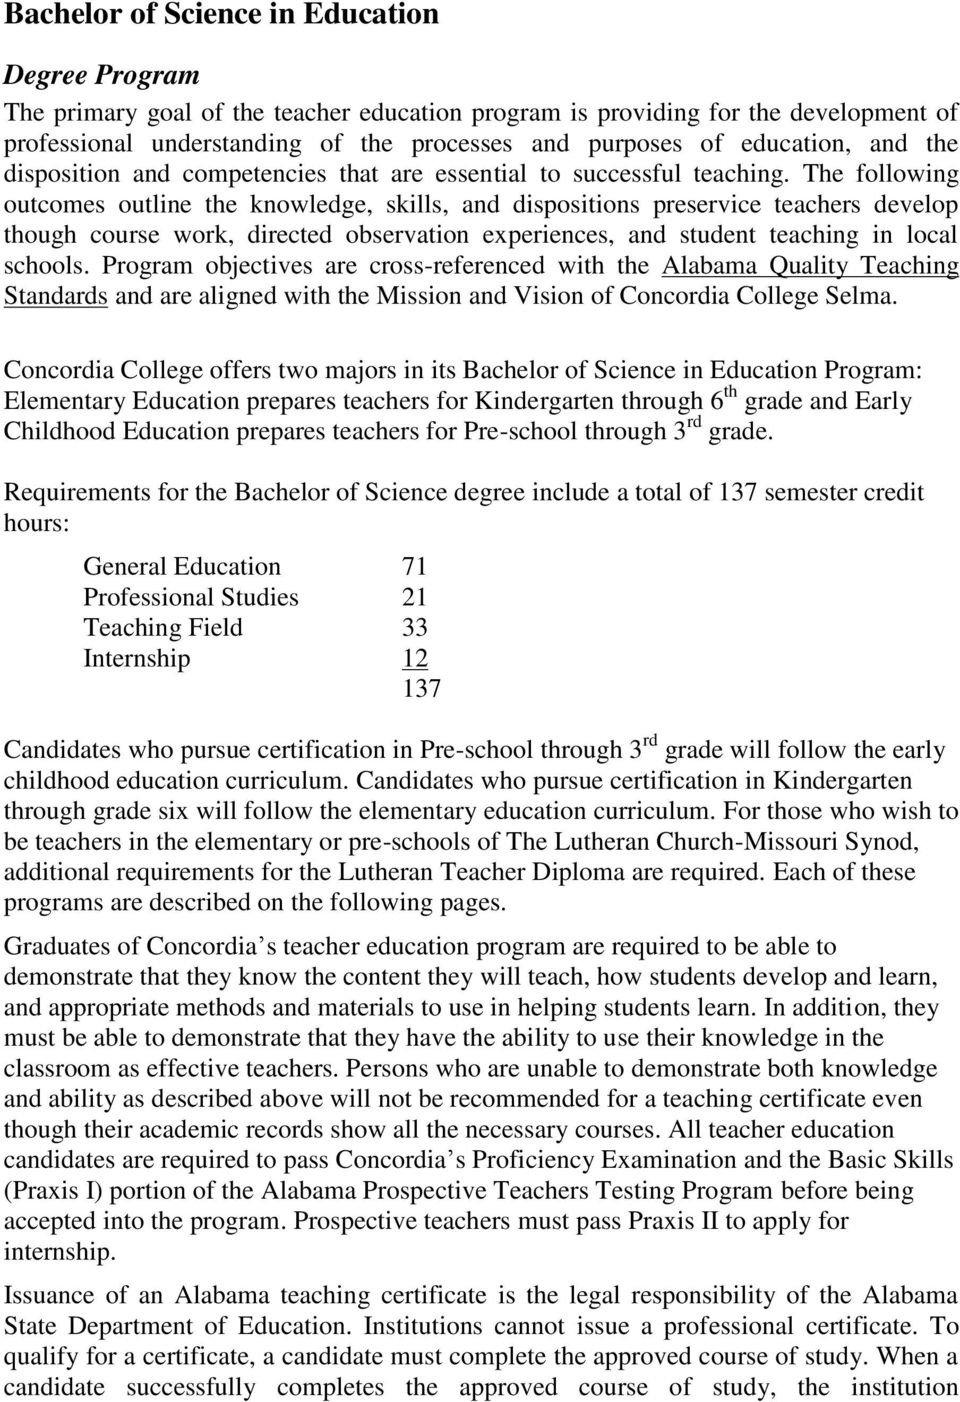 The following outcomes outline the knowledge, skills, and dispositions preservice teachers develop though course work, directed observation experiences, and student teaching in local schools.